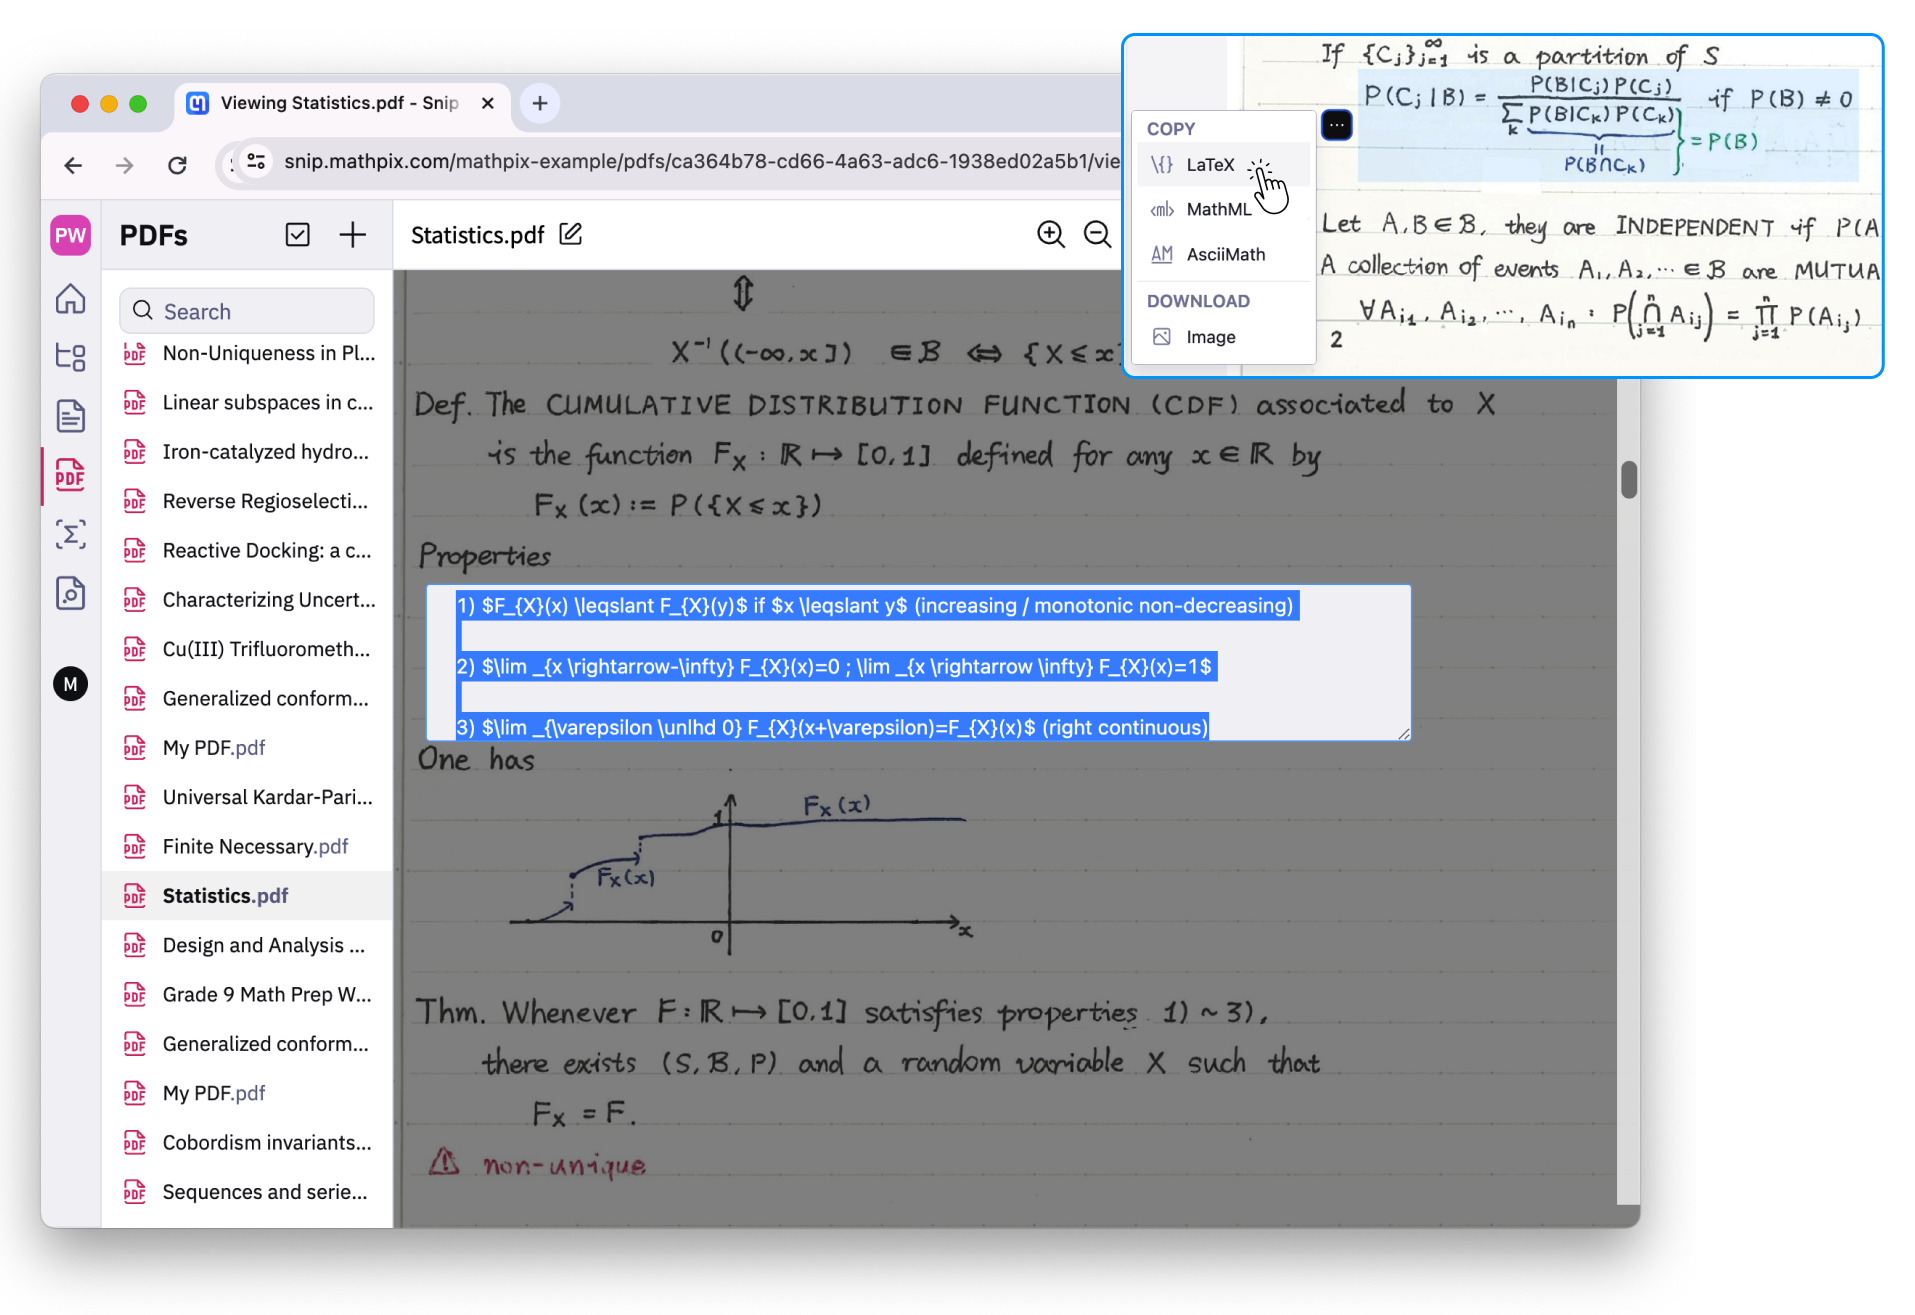 Copy text and math from PDFs